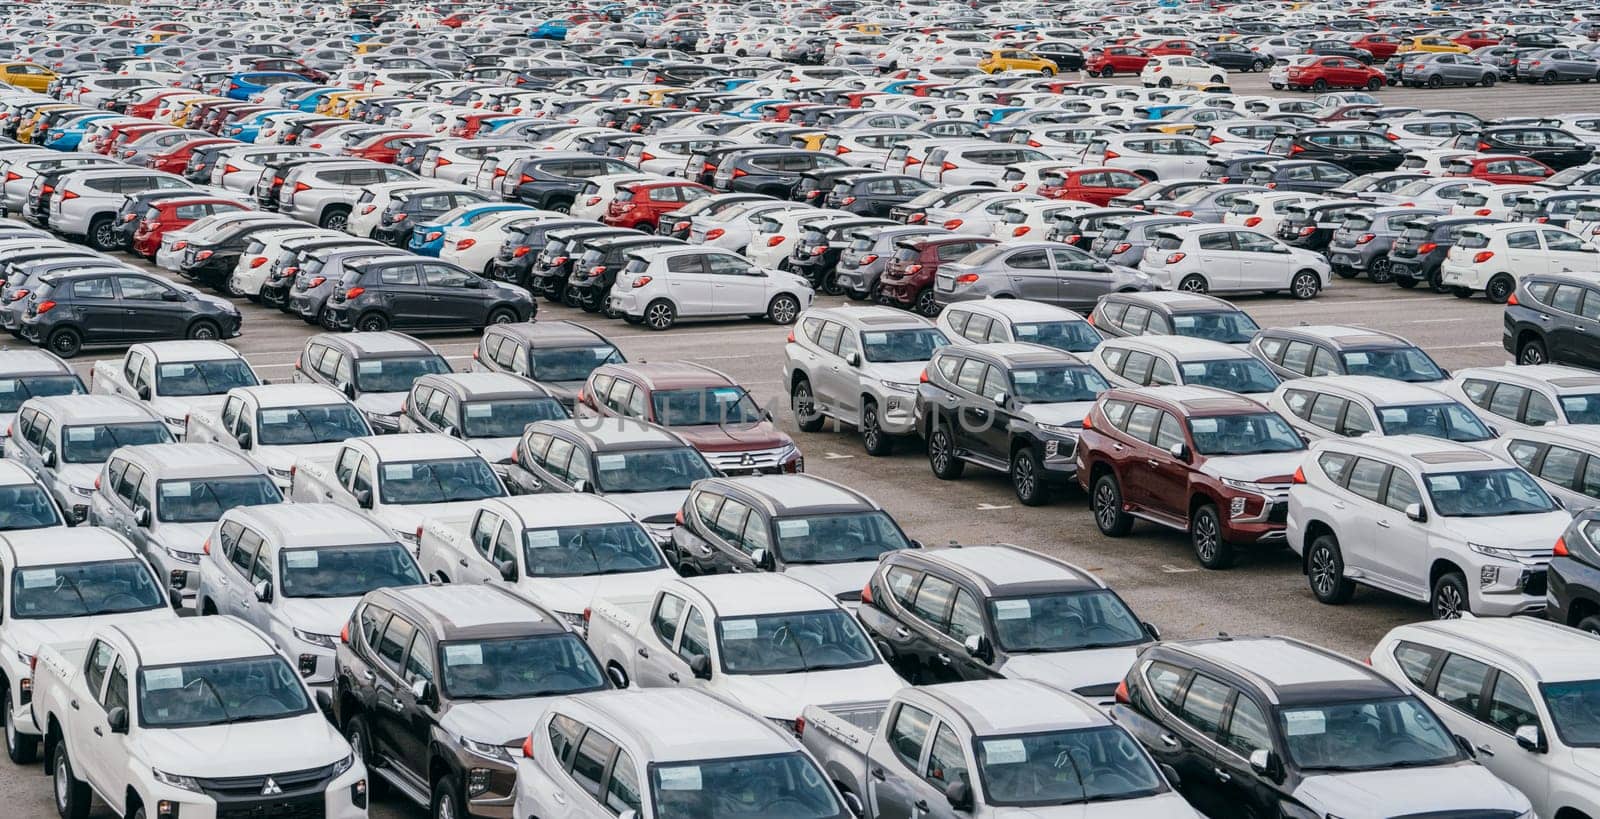 Lamchabang, Thailand - July 02, 2023 Rows of brand new sedans in a bustling factory warehouse showcase the modern technology and global reach of the automotive industry.